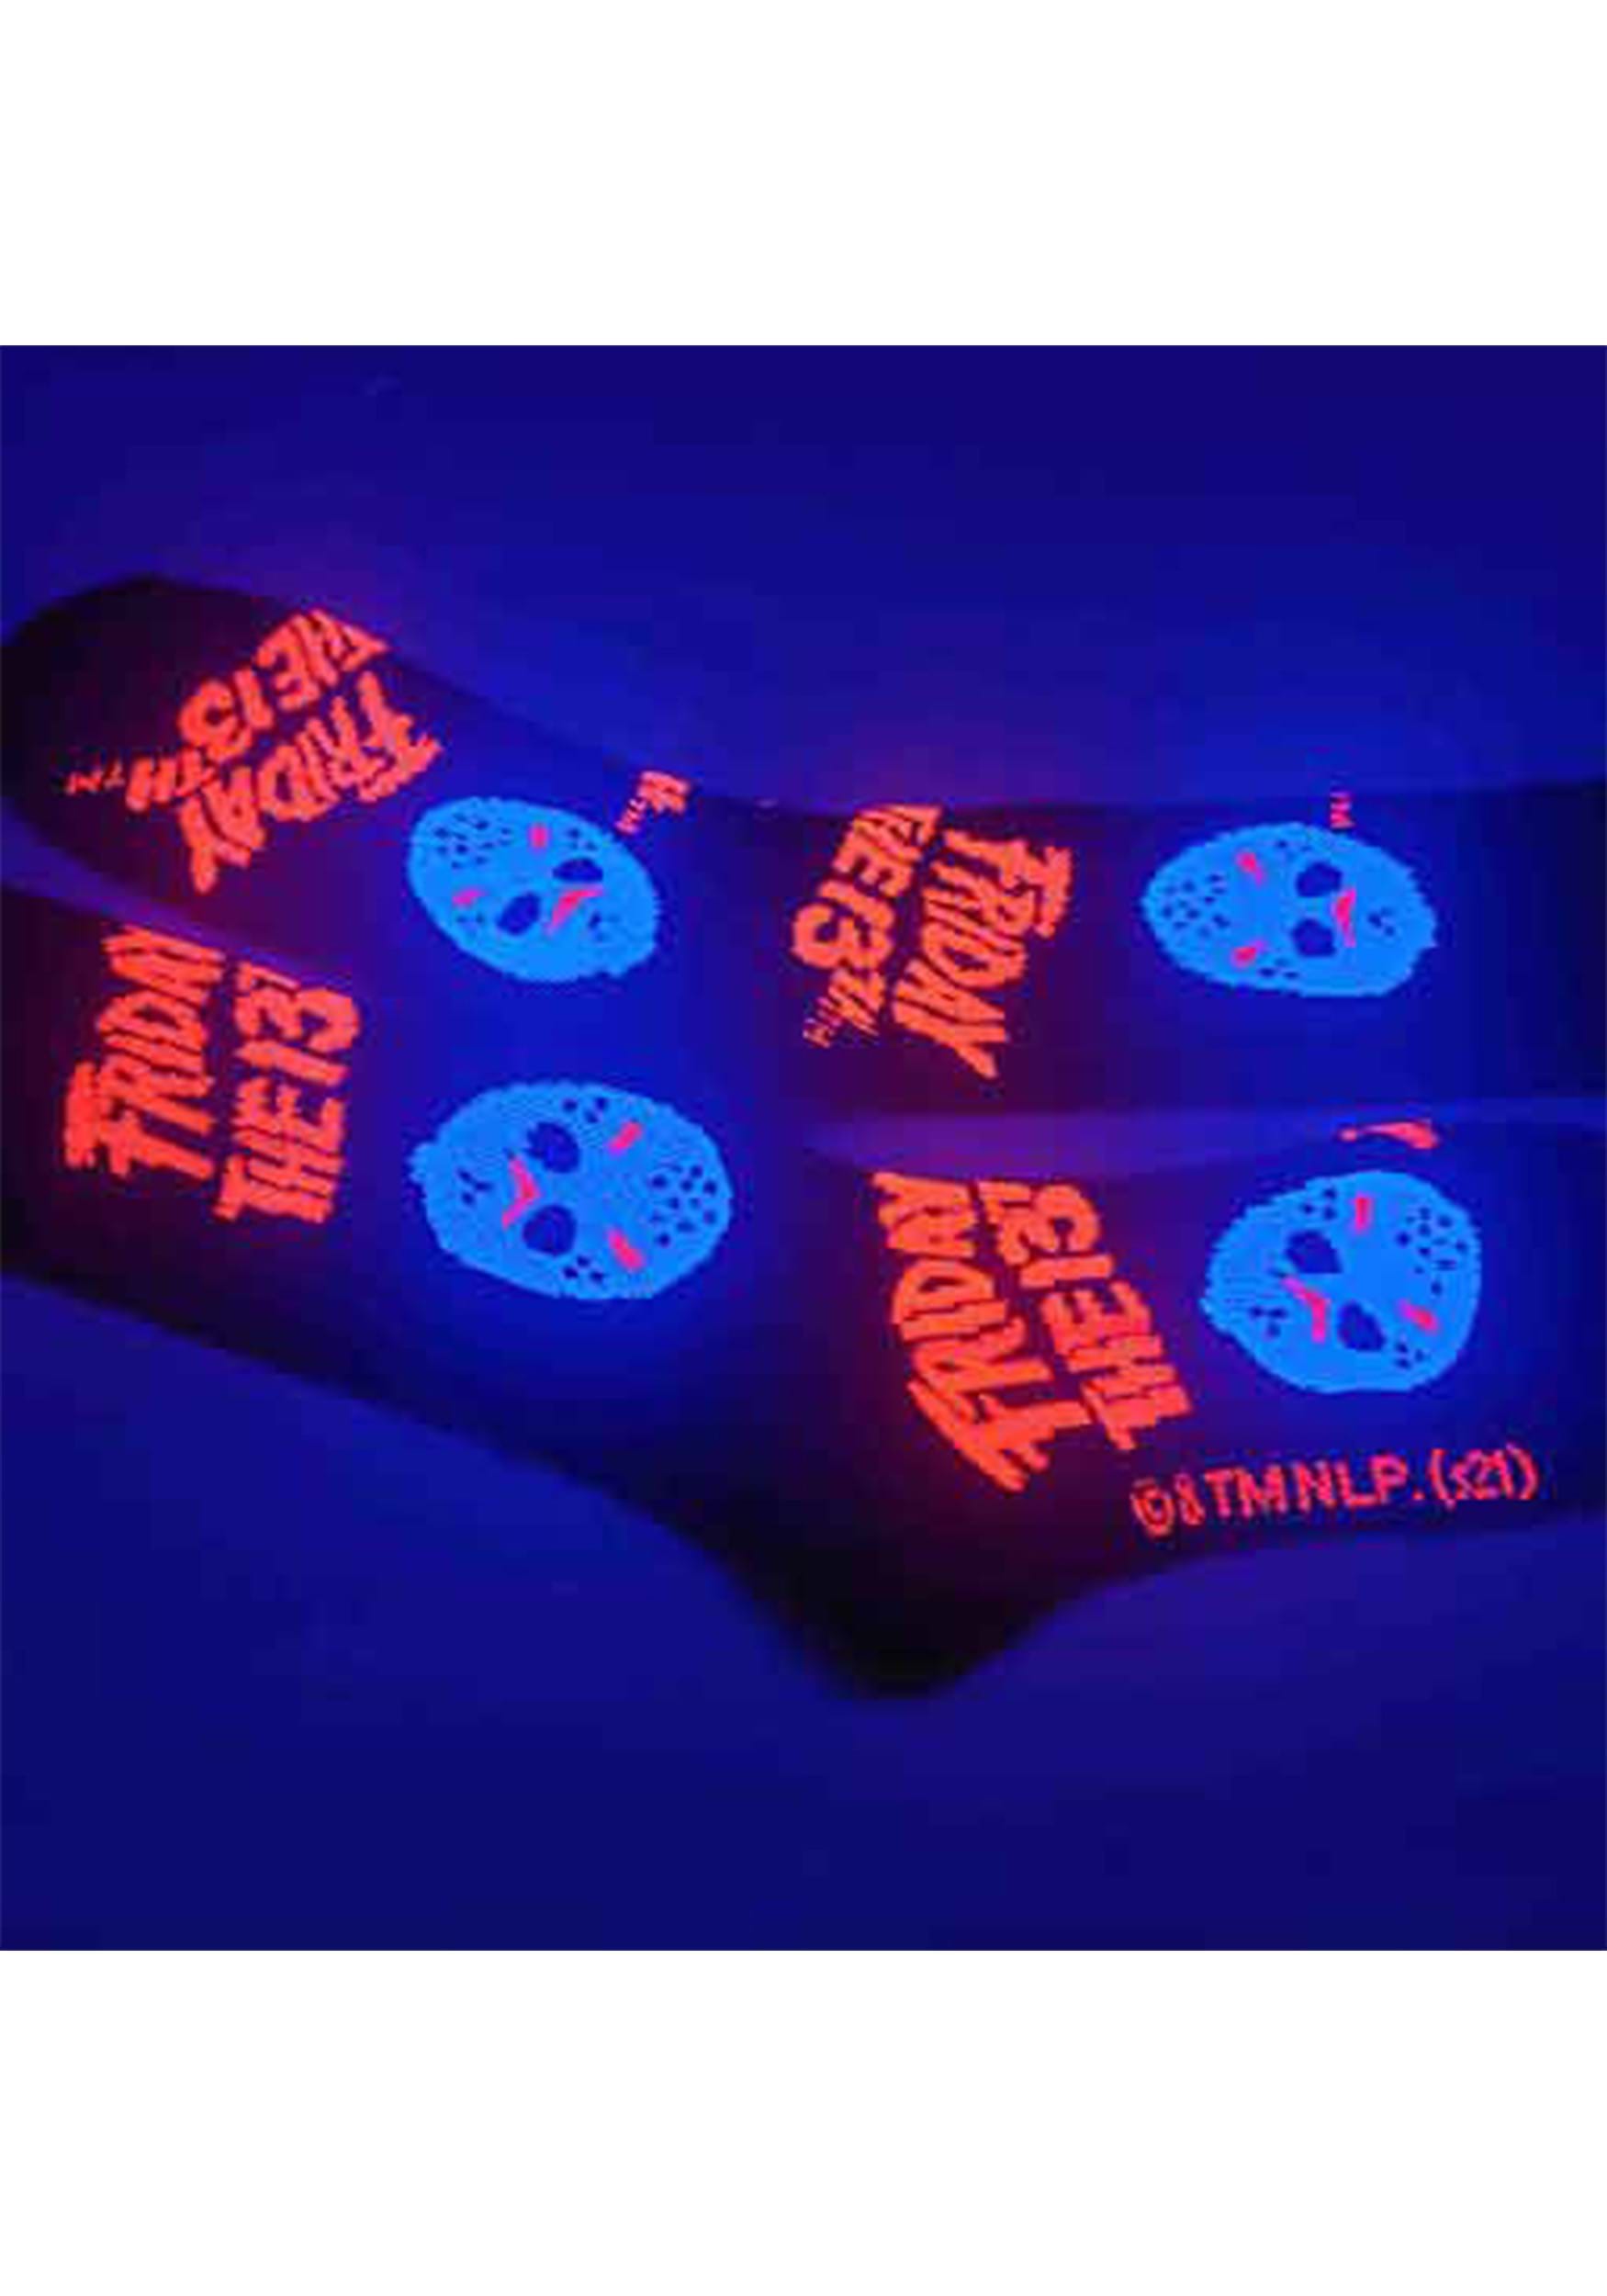 Friday The 13th Icons Black Light Crew Socks For Adults